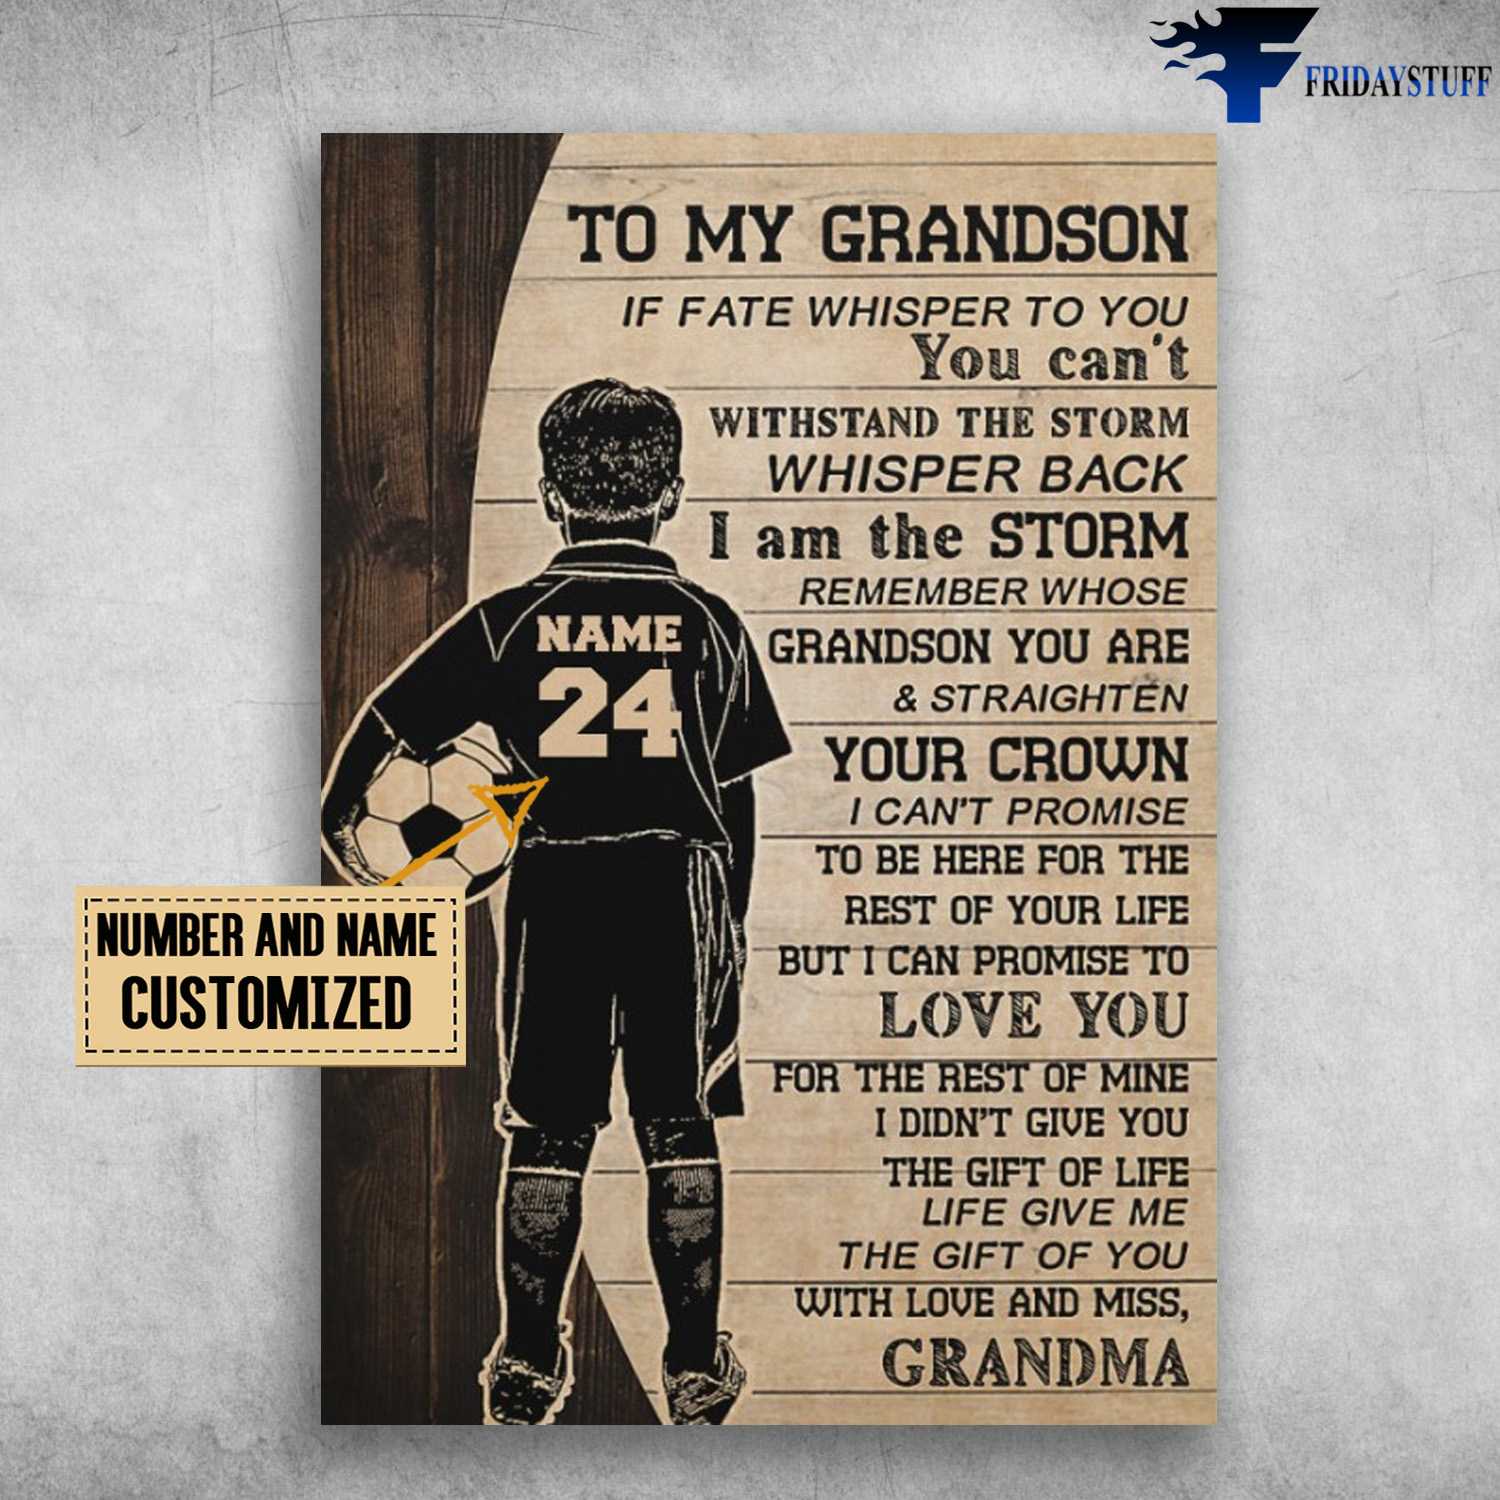 Soccer Lover, To My Grandson, If Fate Whiser To You, You Can't Withstand The Storm, Whisper Back, I Am The Storm, Remember Whose Grandson You Are